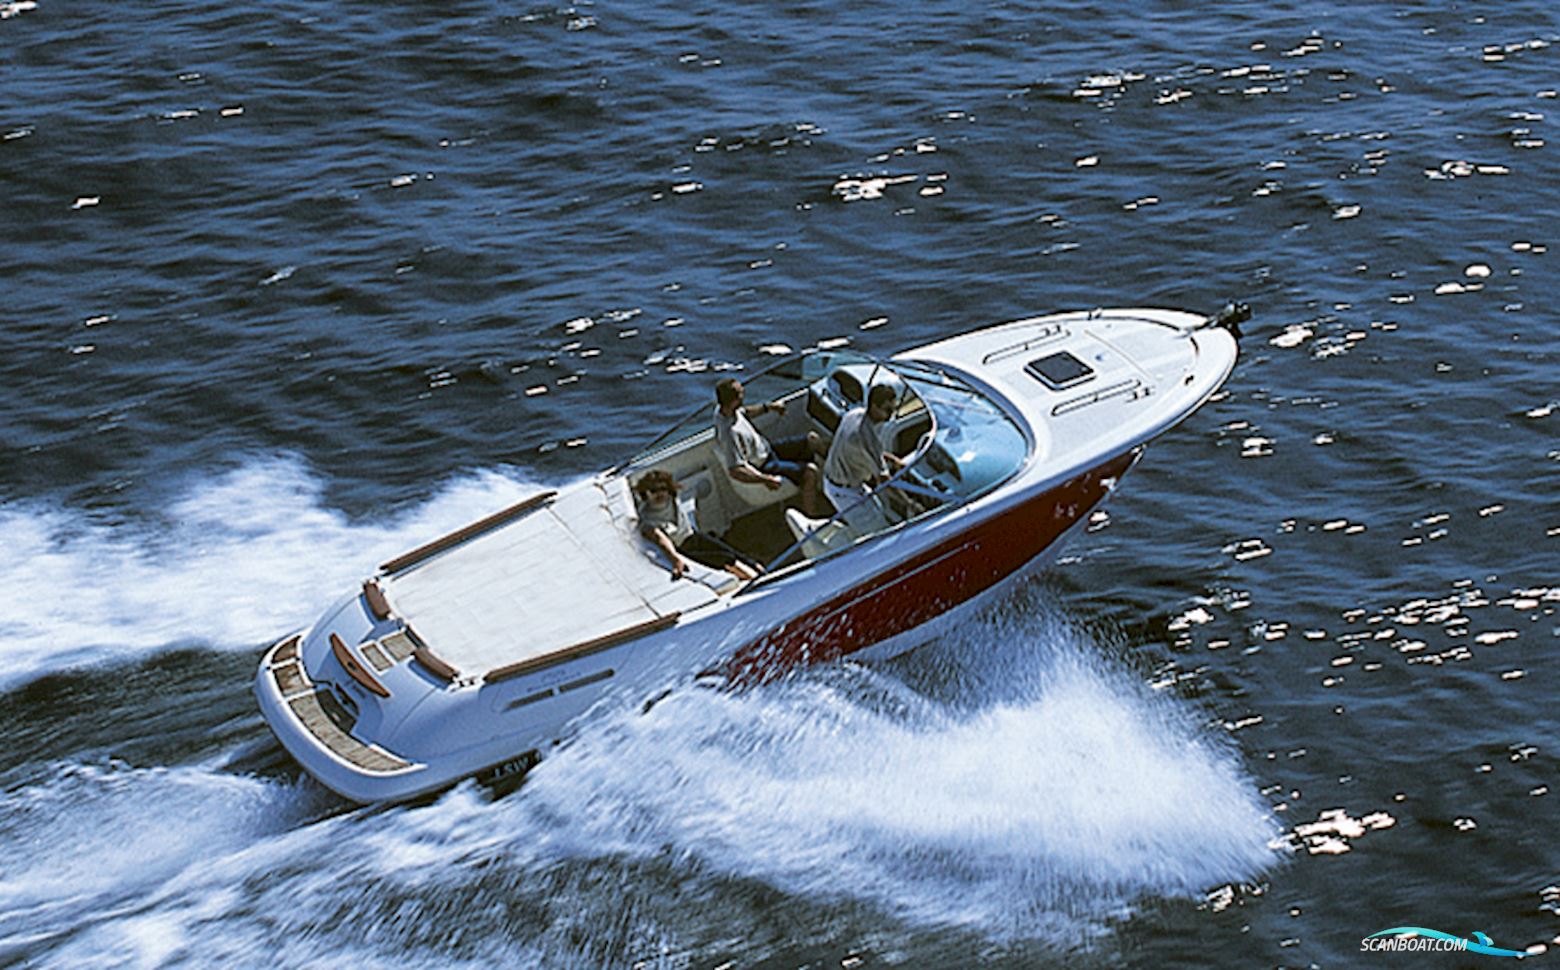 Jeanneau Runabout 755 (Nyere Motor) Motor boat 2004, with Mercruiser 5.0 engine, Denmark